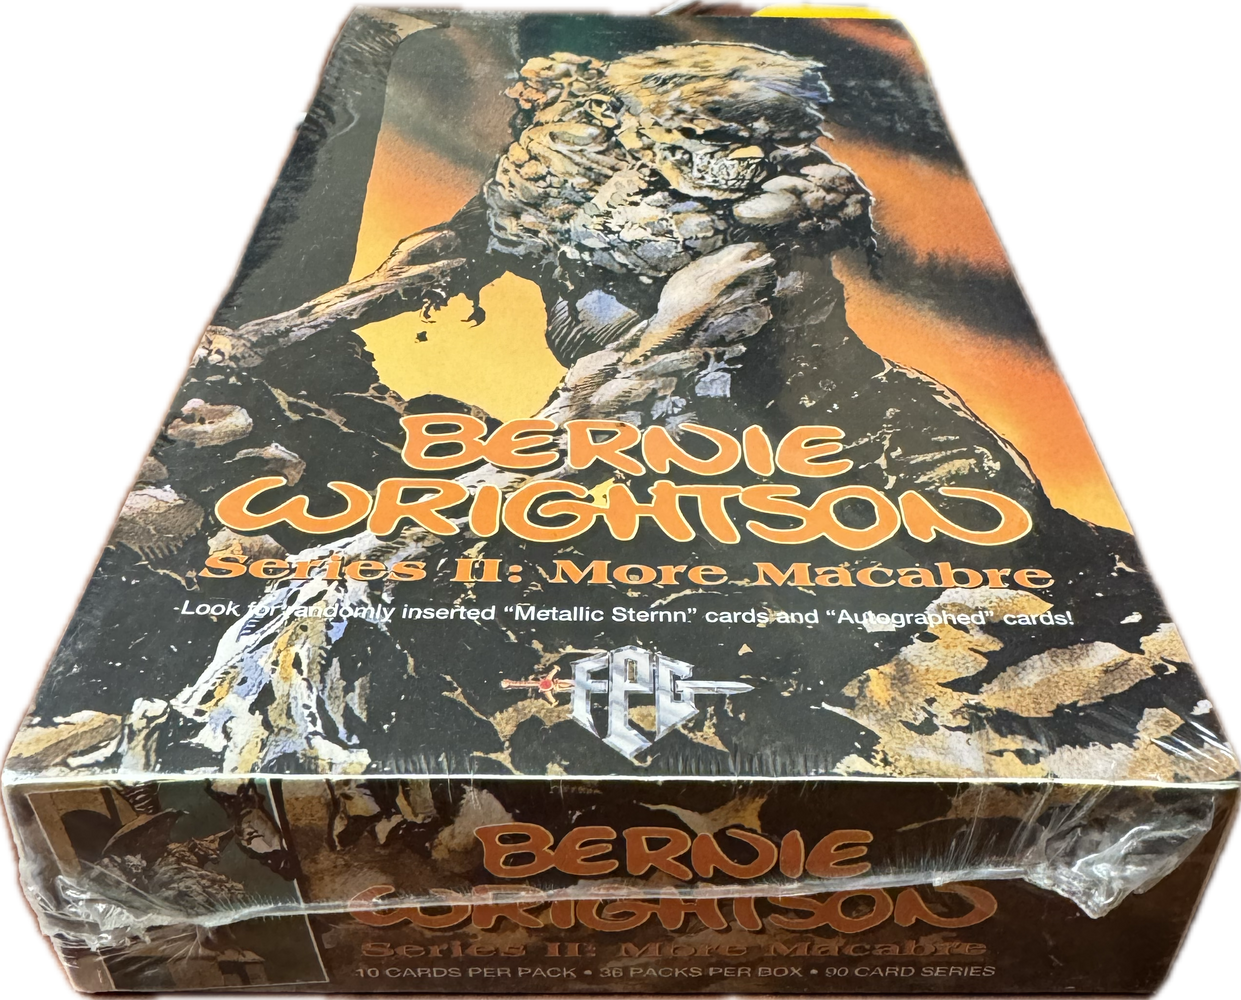 1994 Bernie Wrightson Series 2 More Macabre Fantasy Trading Card Box - Pastime Sports & Games